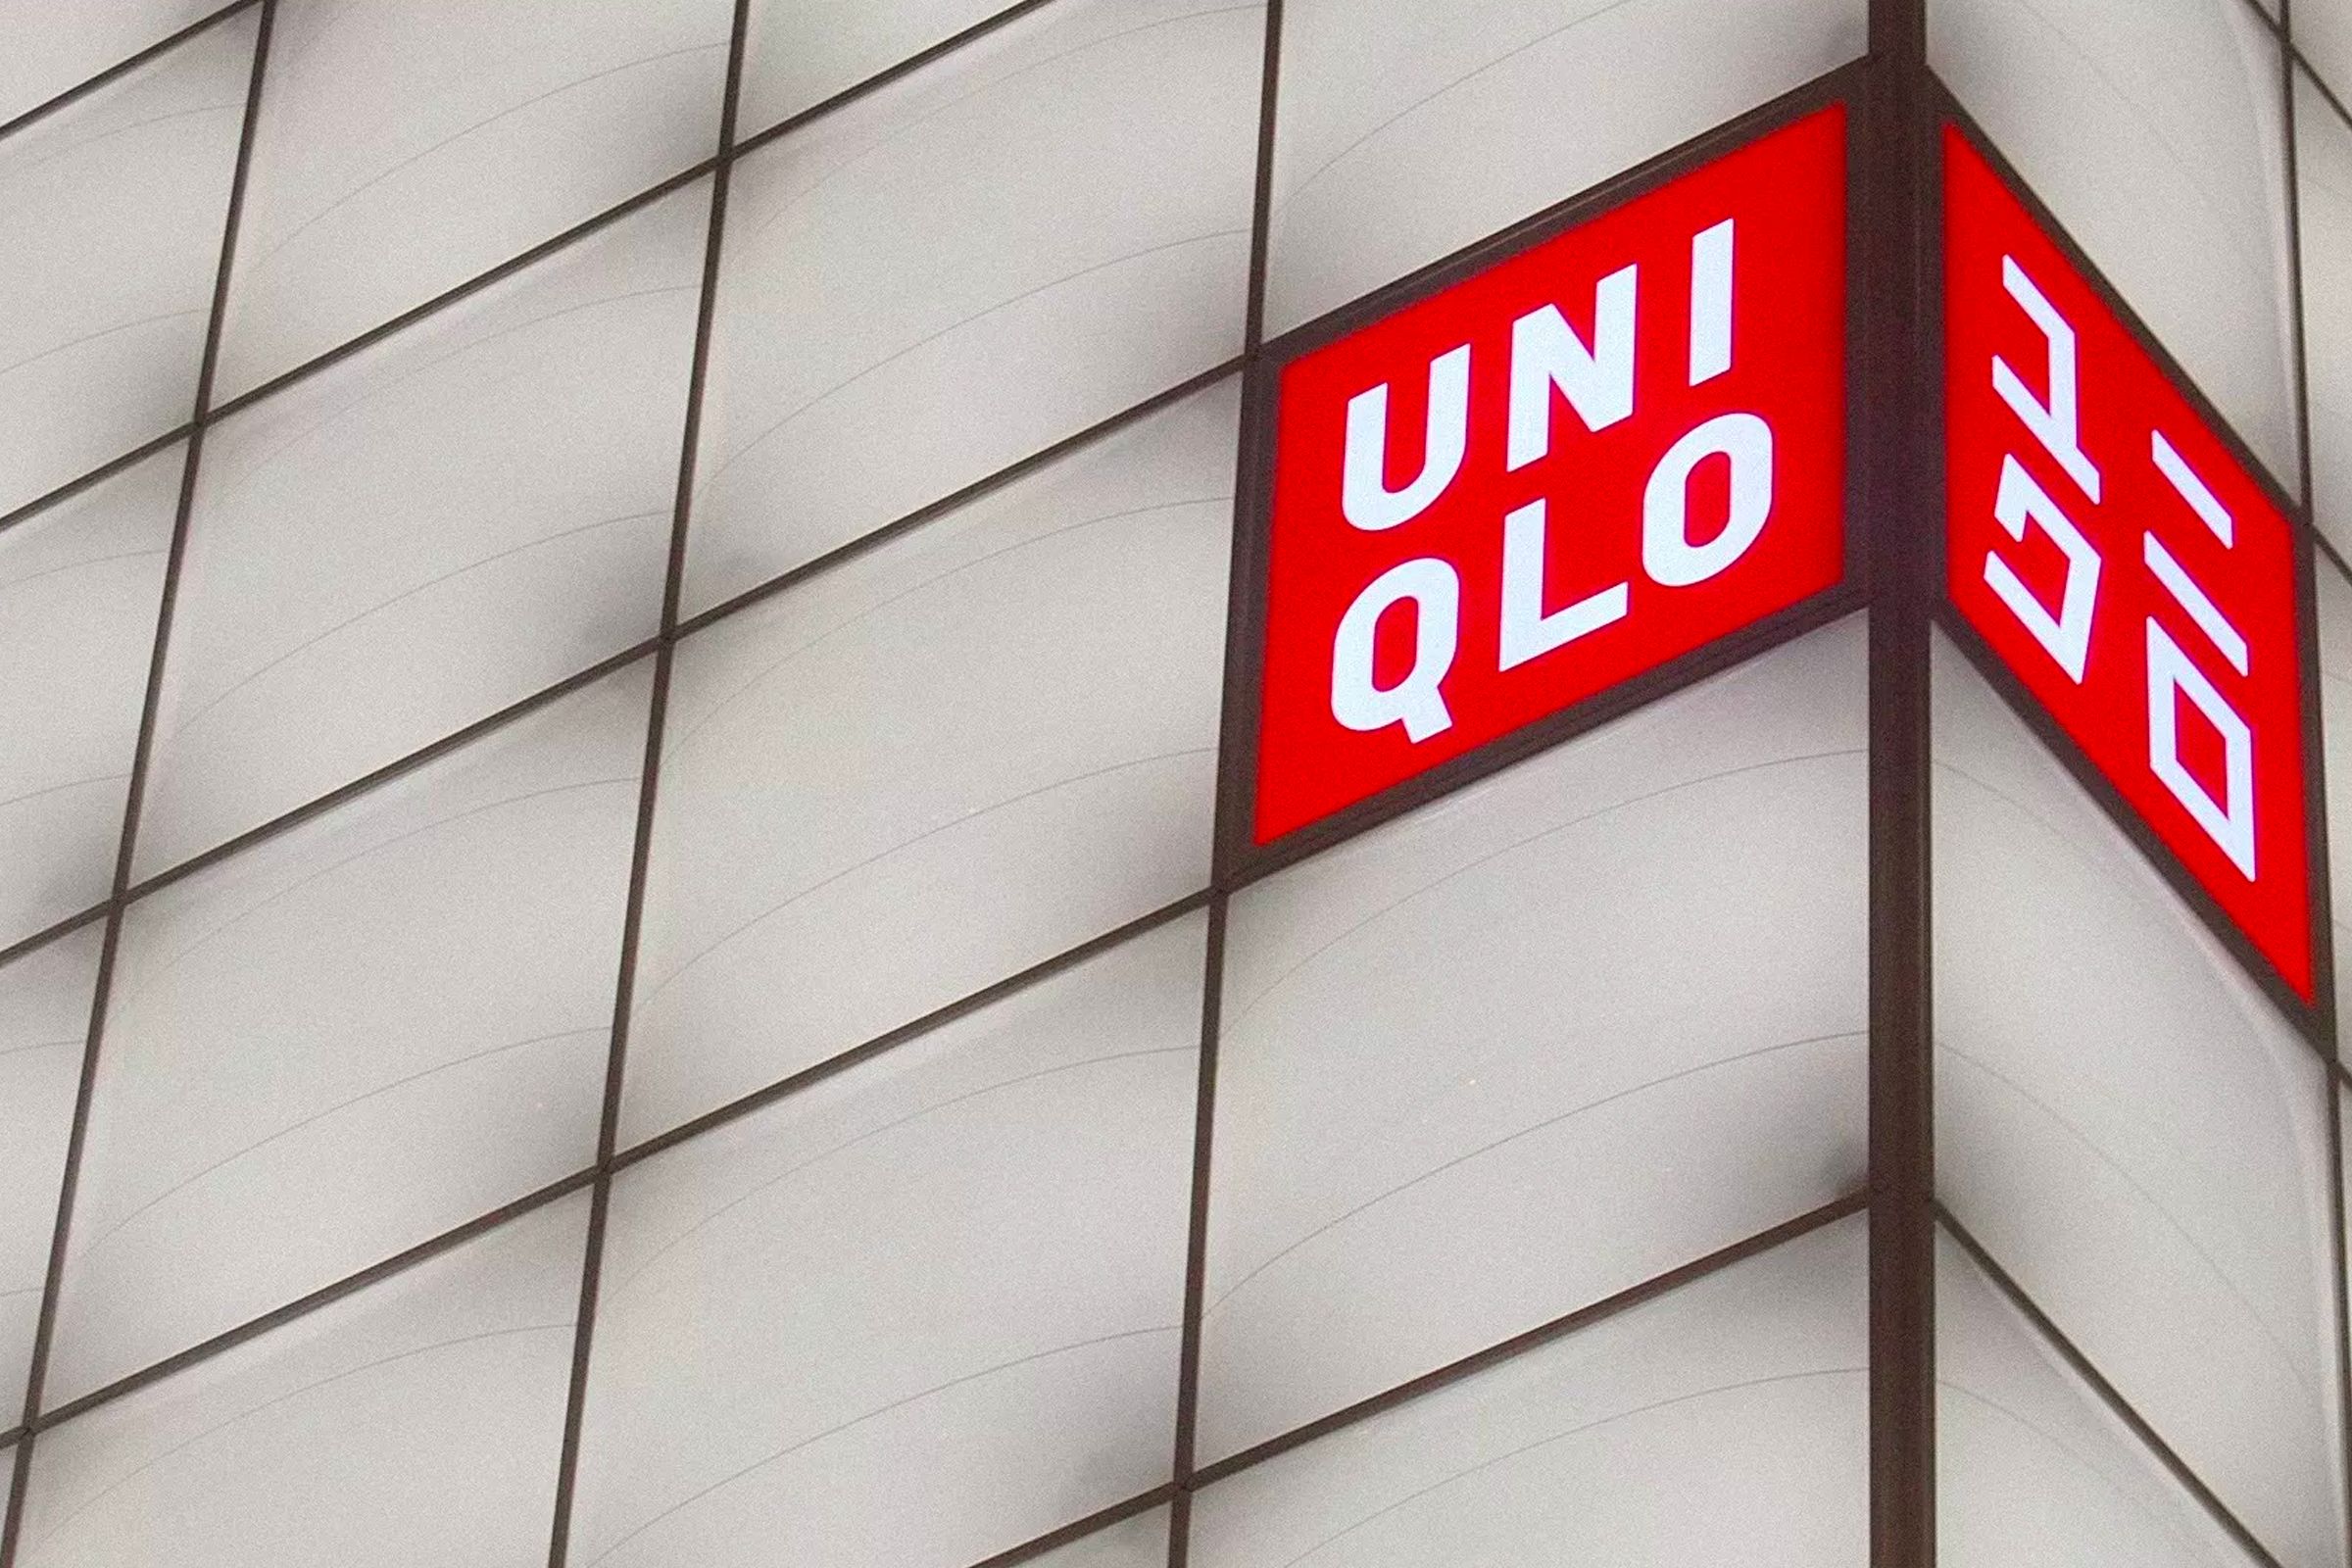 A Unique Approach to Clothing: The Story of Uniqlo